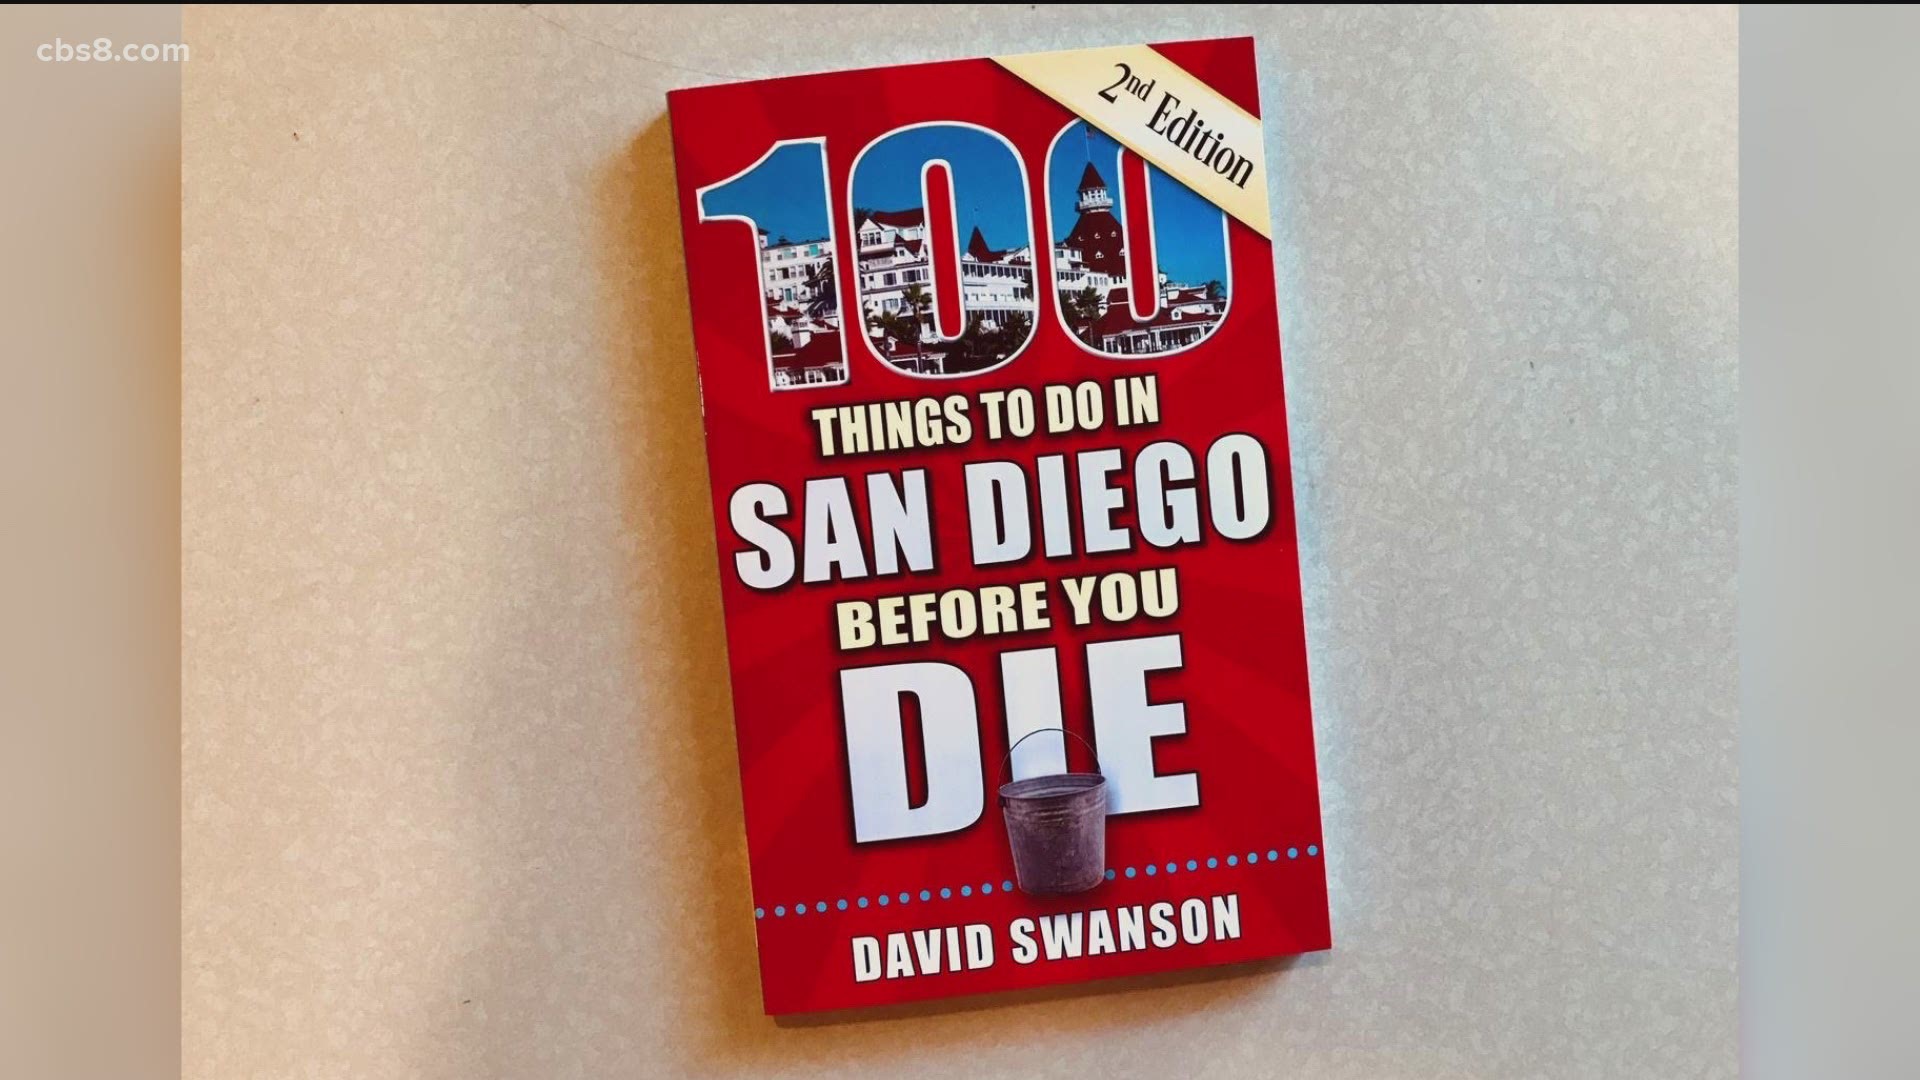 Author and San Diego expert, David Swanson talked about who his book is for and how he narrowed his list down to 100 things to do. www.100sandiego.com